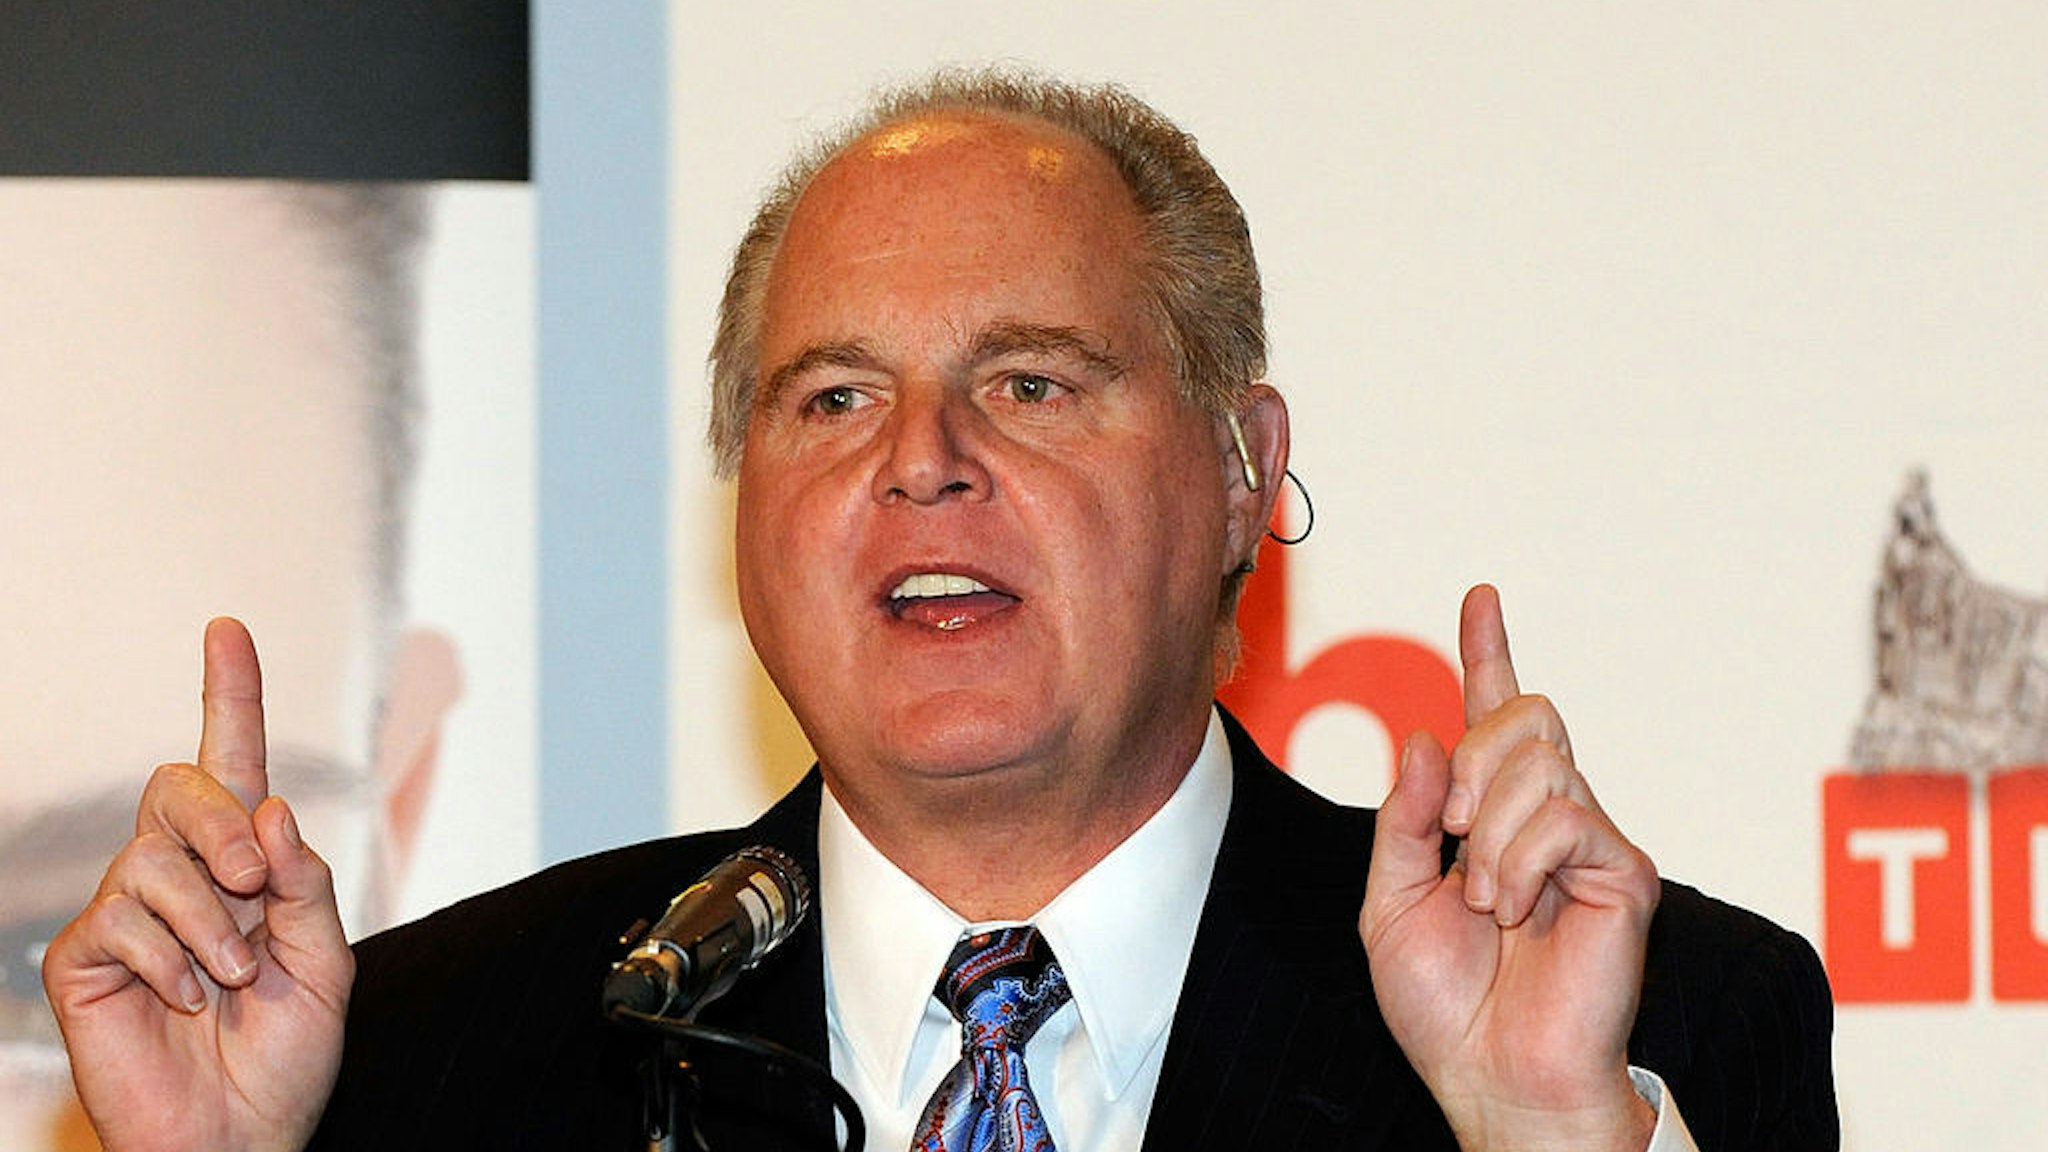 Radio talk show host and conservative commentator Rush Limbaugh, one of the judges for the 2010 Miss America Pageant, speaks during a news conference for judges at the Planet Hollywood Resort & Casino January 27, 2010 in Las Vegas, Nevada.